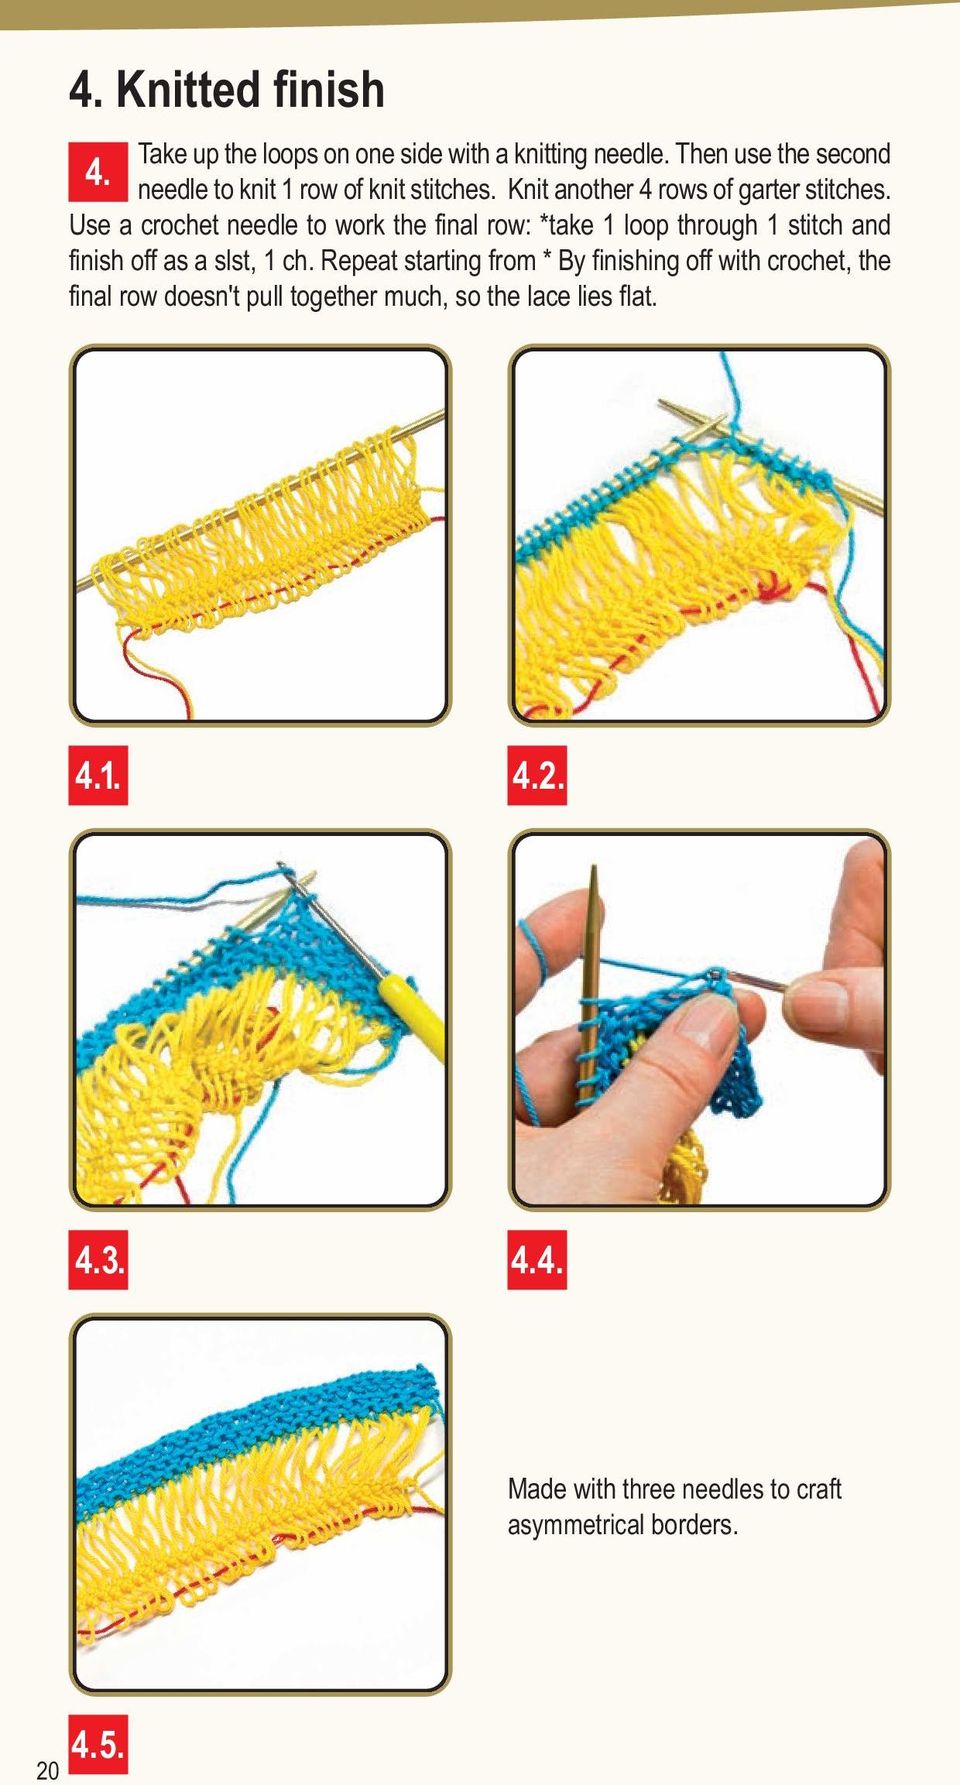 Use a crochet needle to work the final row: *take 1 loop through 1 stitch and finish off as a slst, 1 ch.